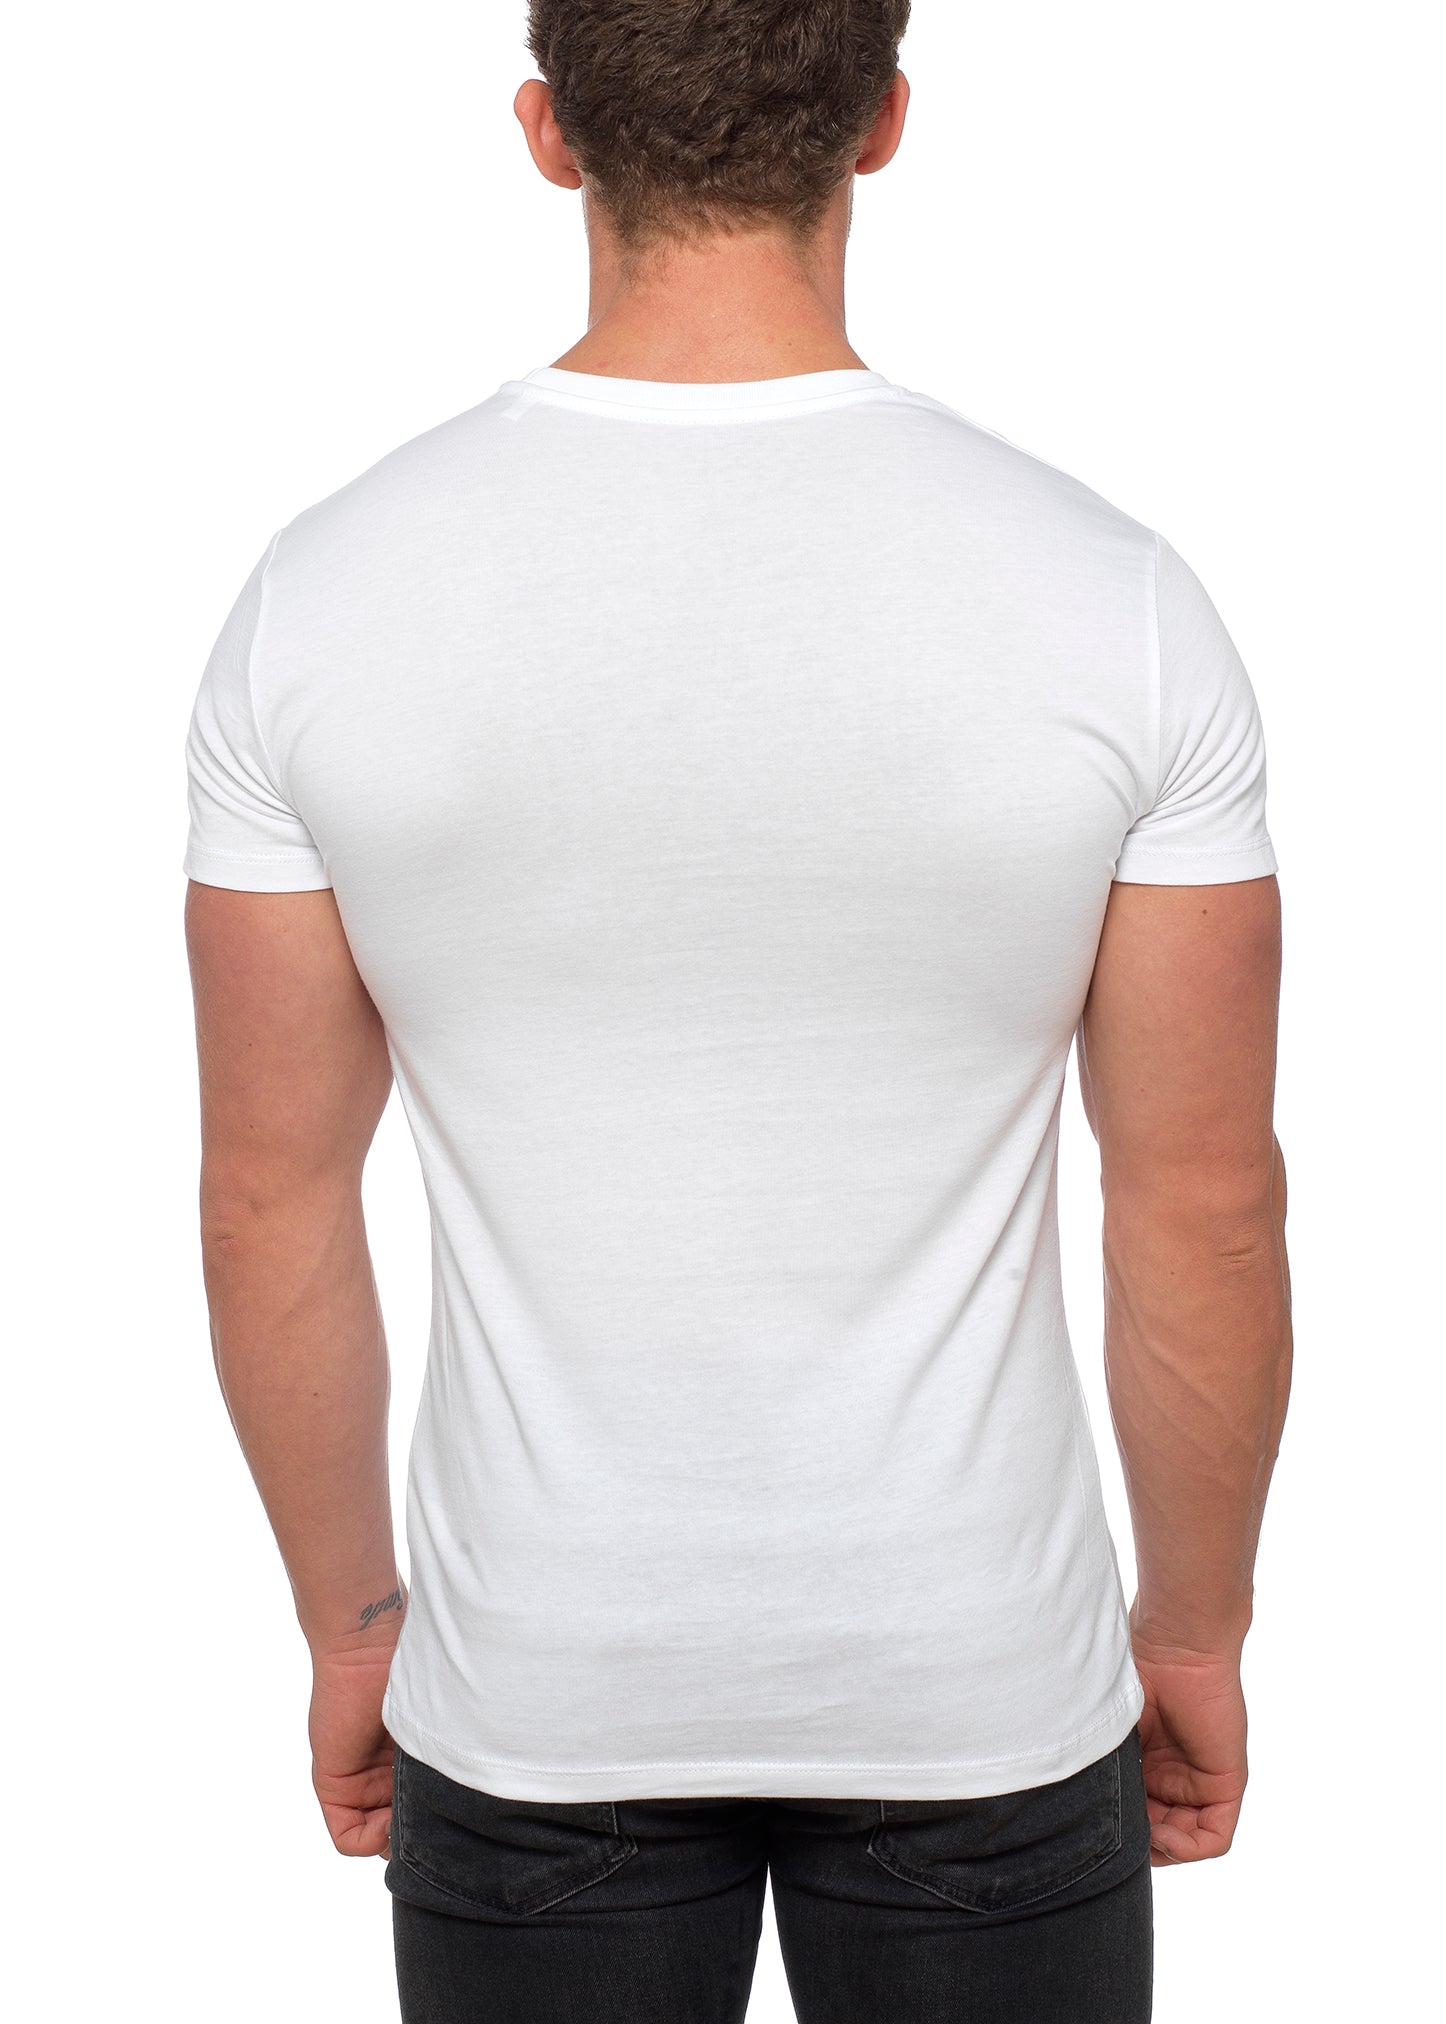 Muscle Fit White T Shirt